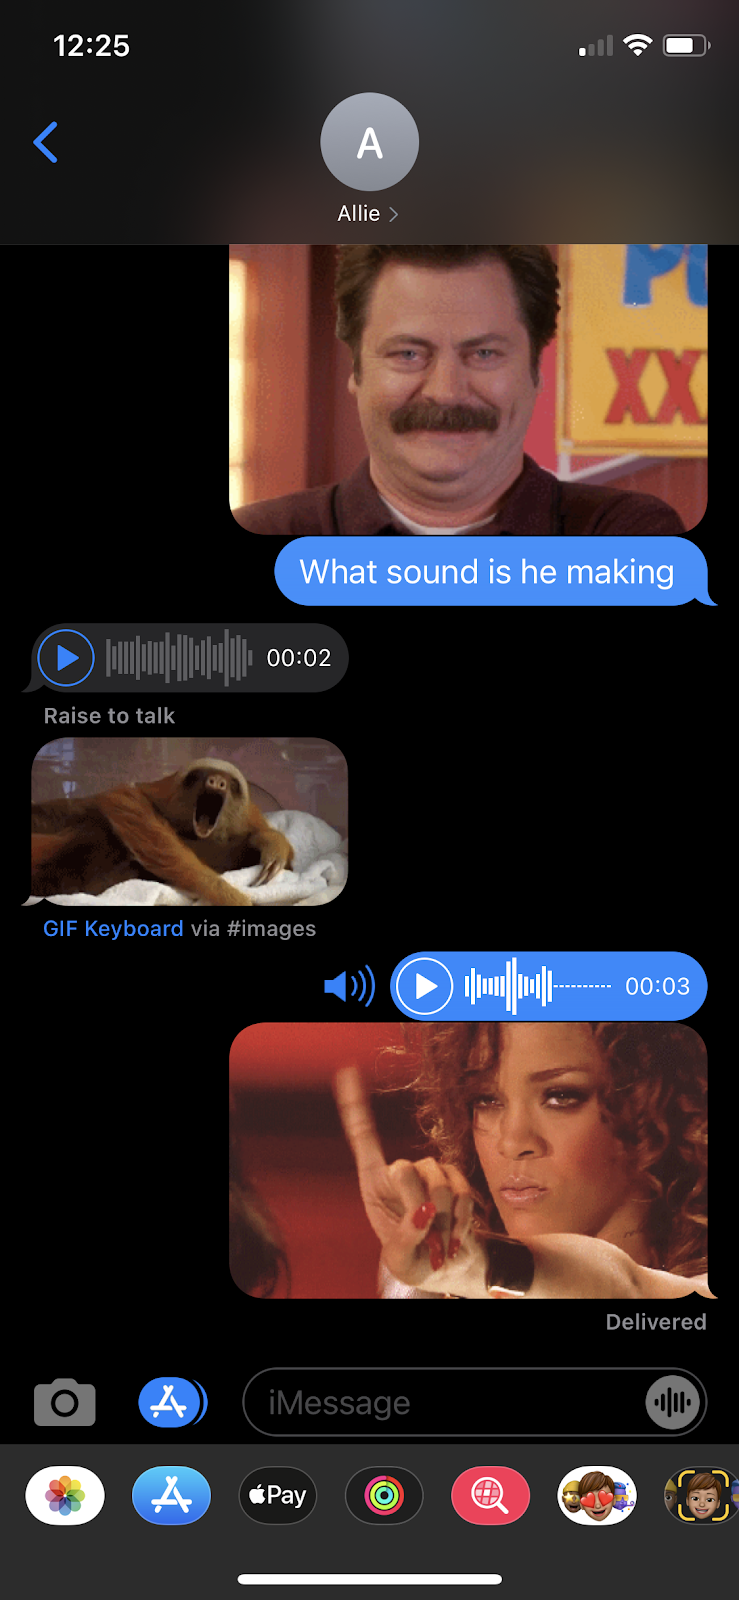 tiktok guess the sound showing GIF of Ron Swanson and asking other person to guess what noise he is making. 